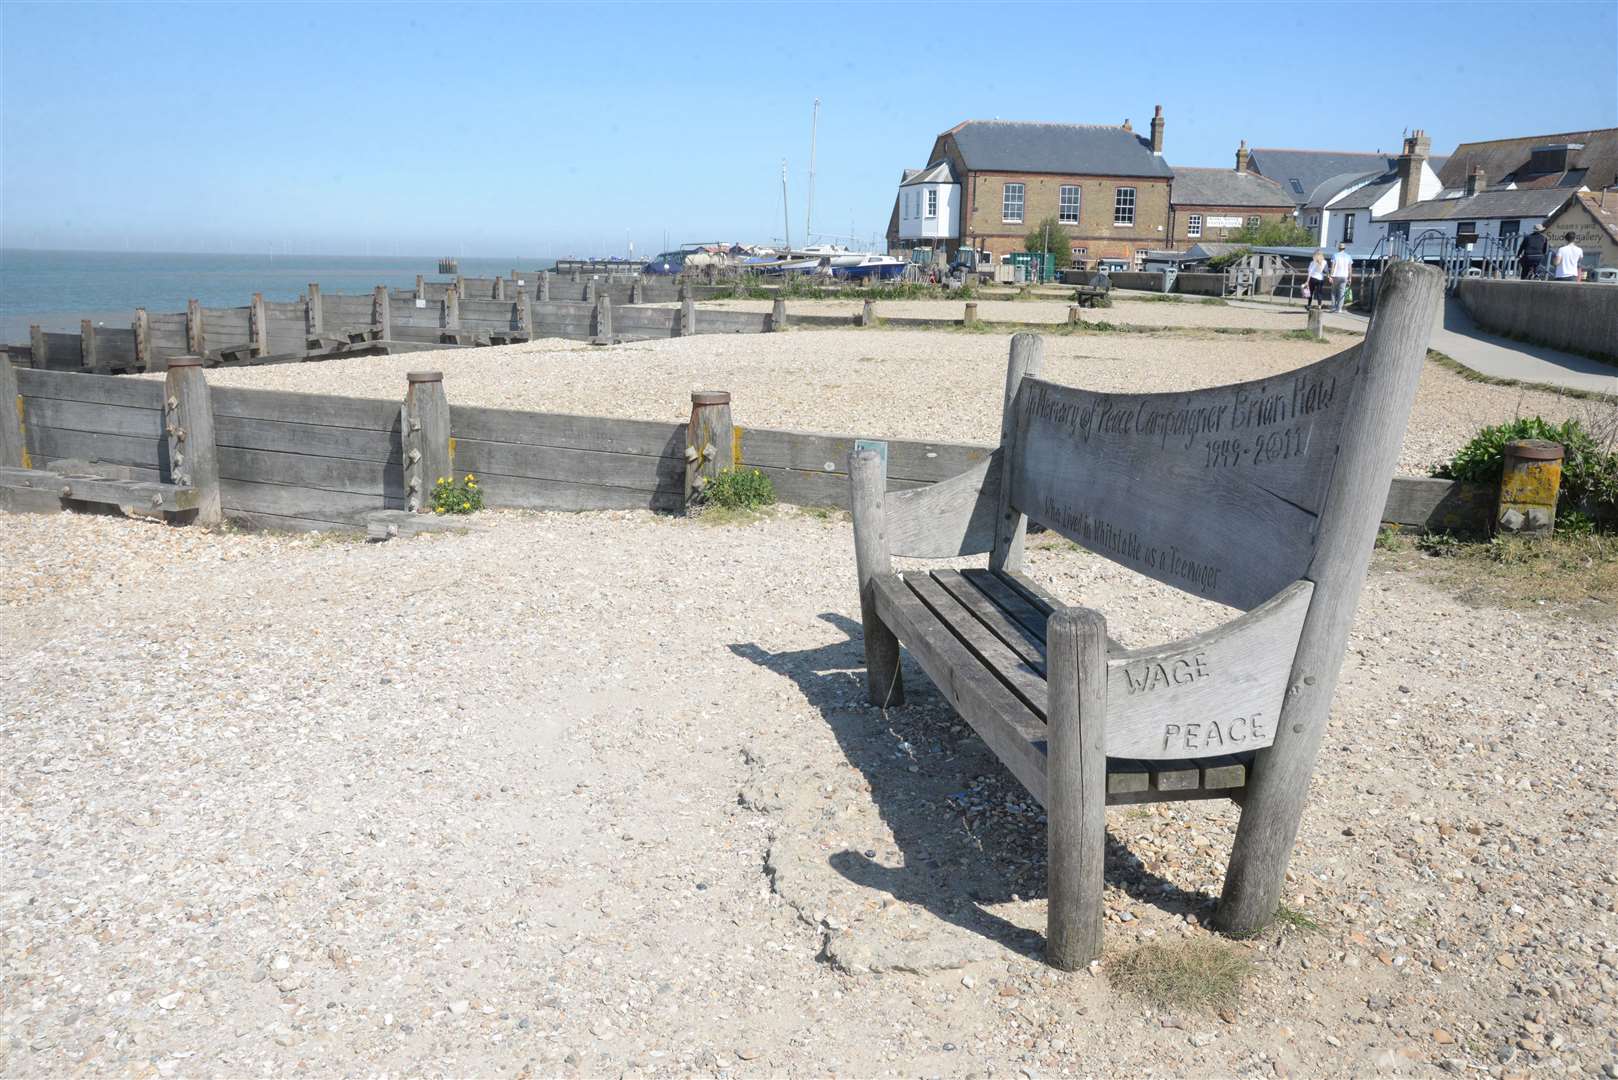 The dispersal order covers West Beach in Whitstable. Picture: Chris Davey